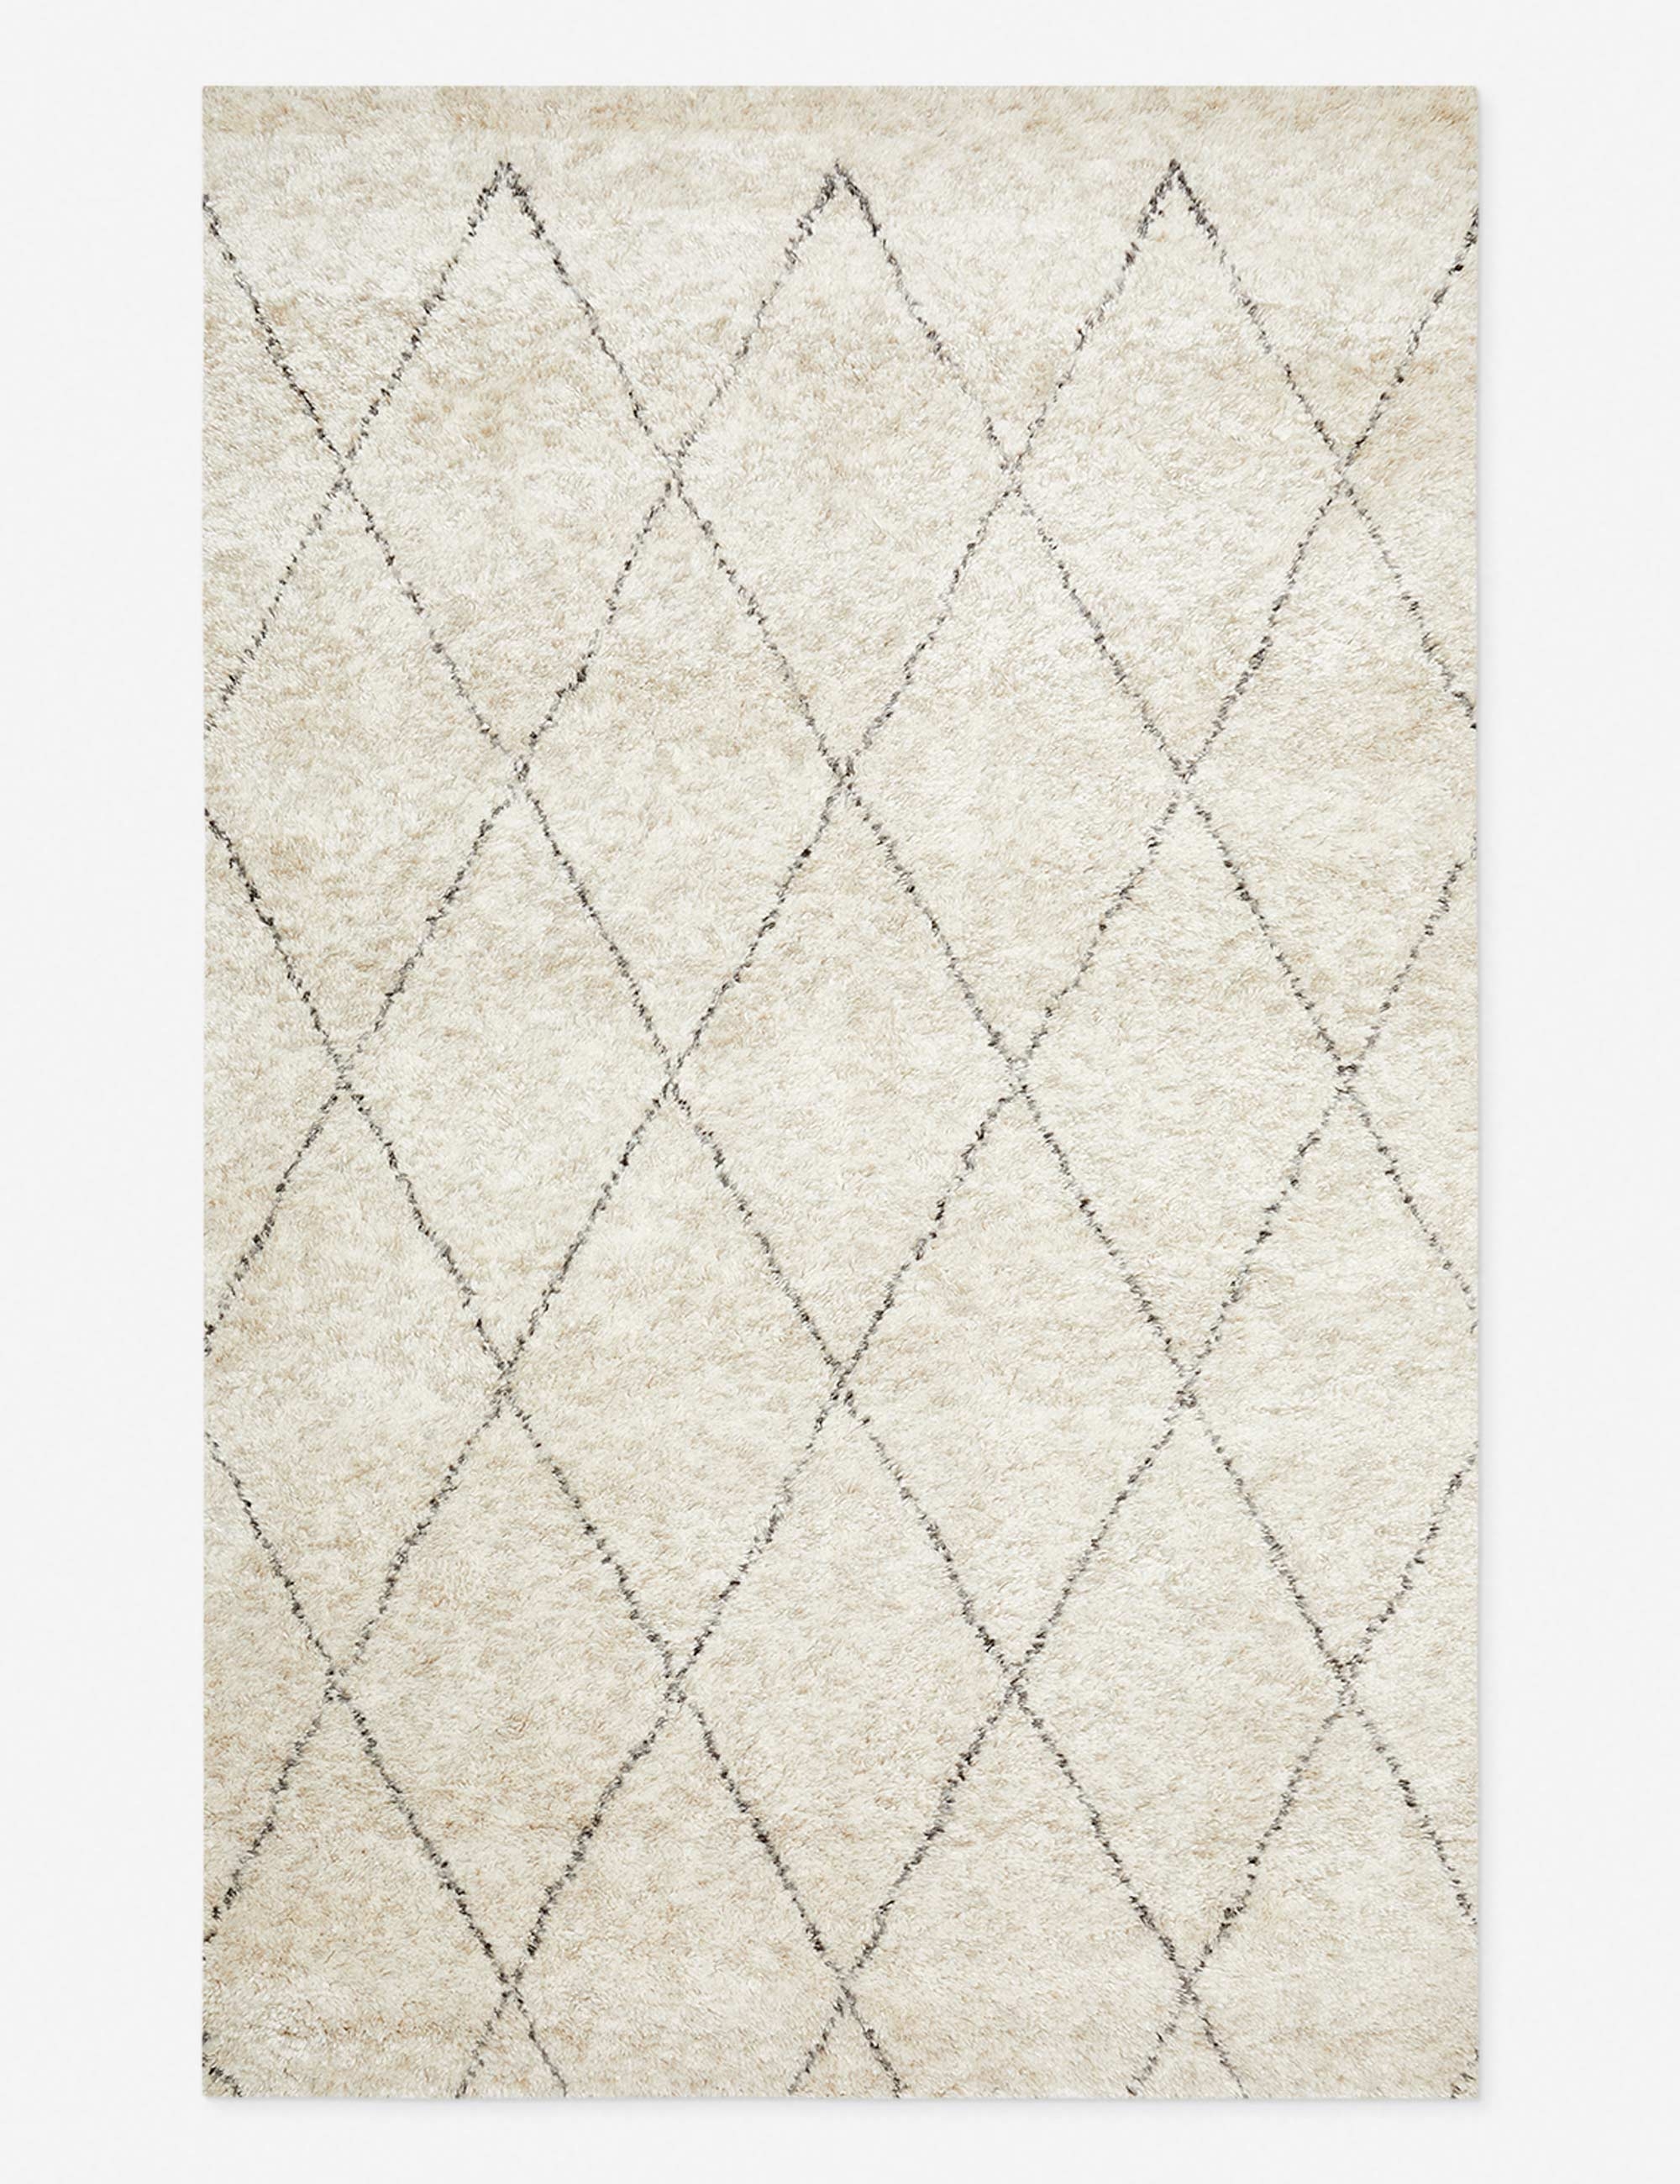 Ferra Hand-Knotted Wool-Blend Moroccan Style Shag Rug - Image 0